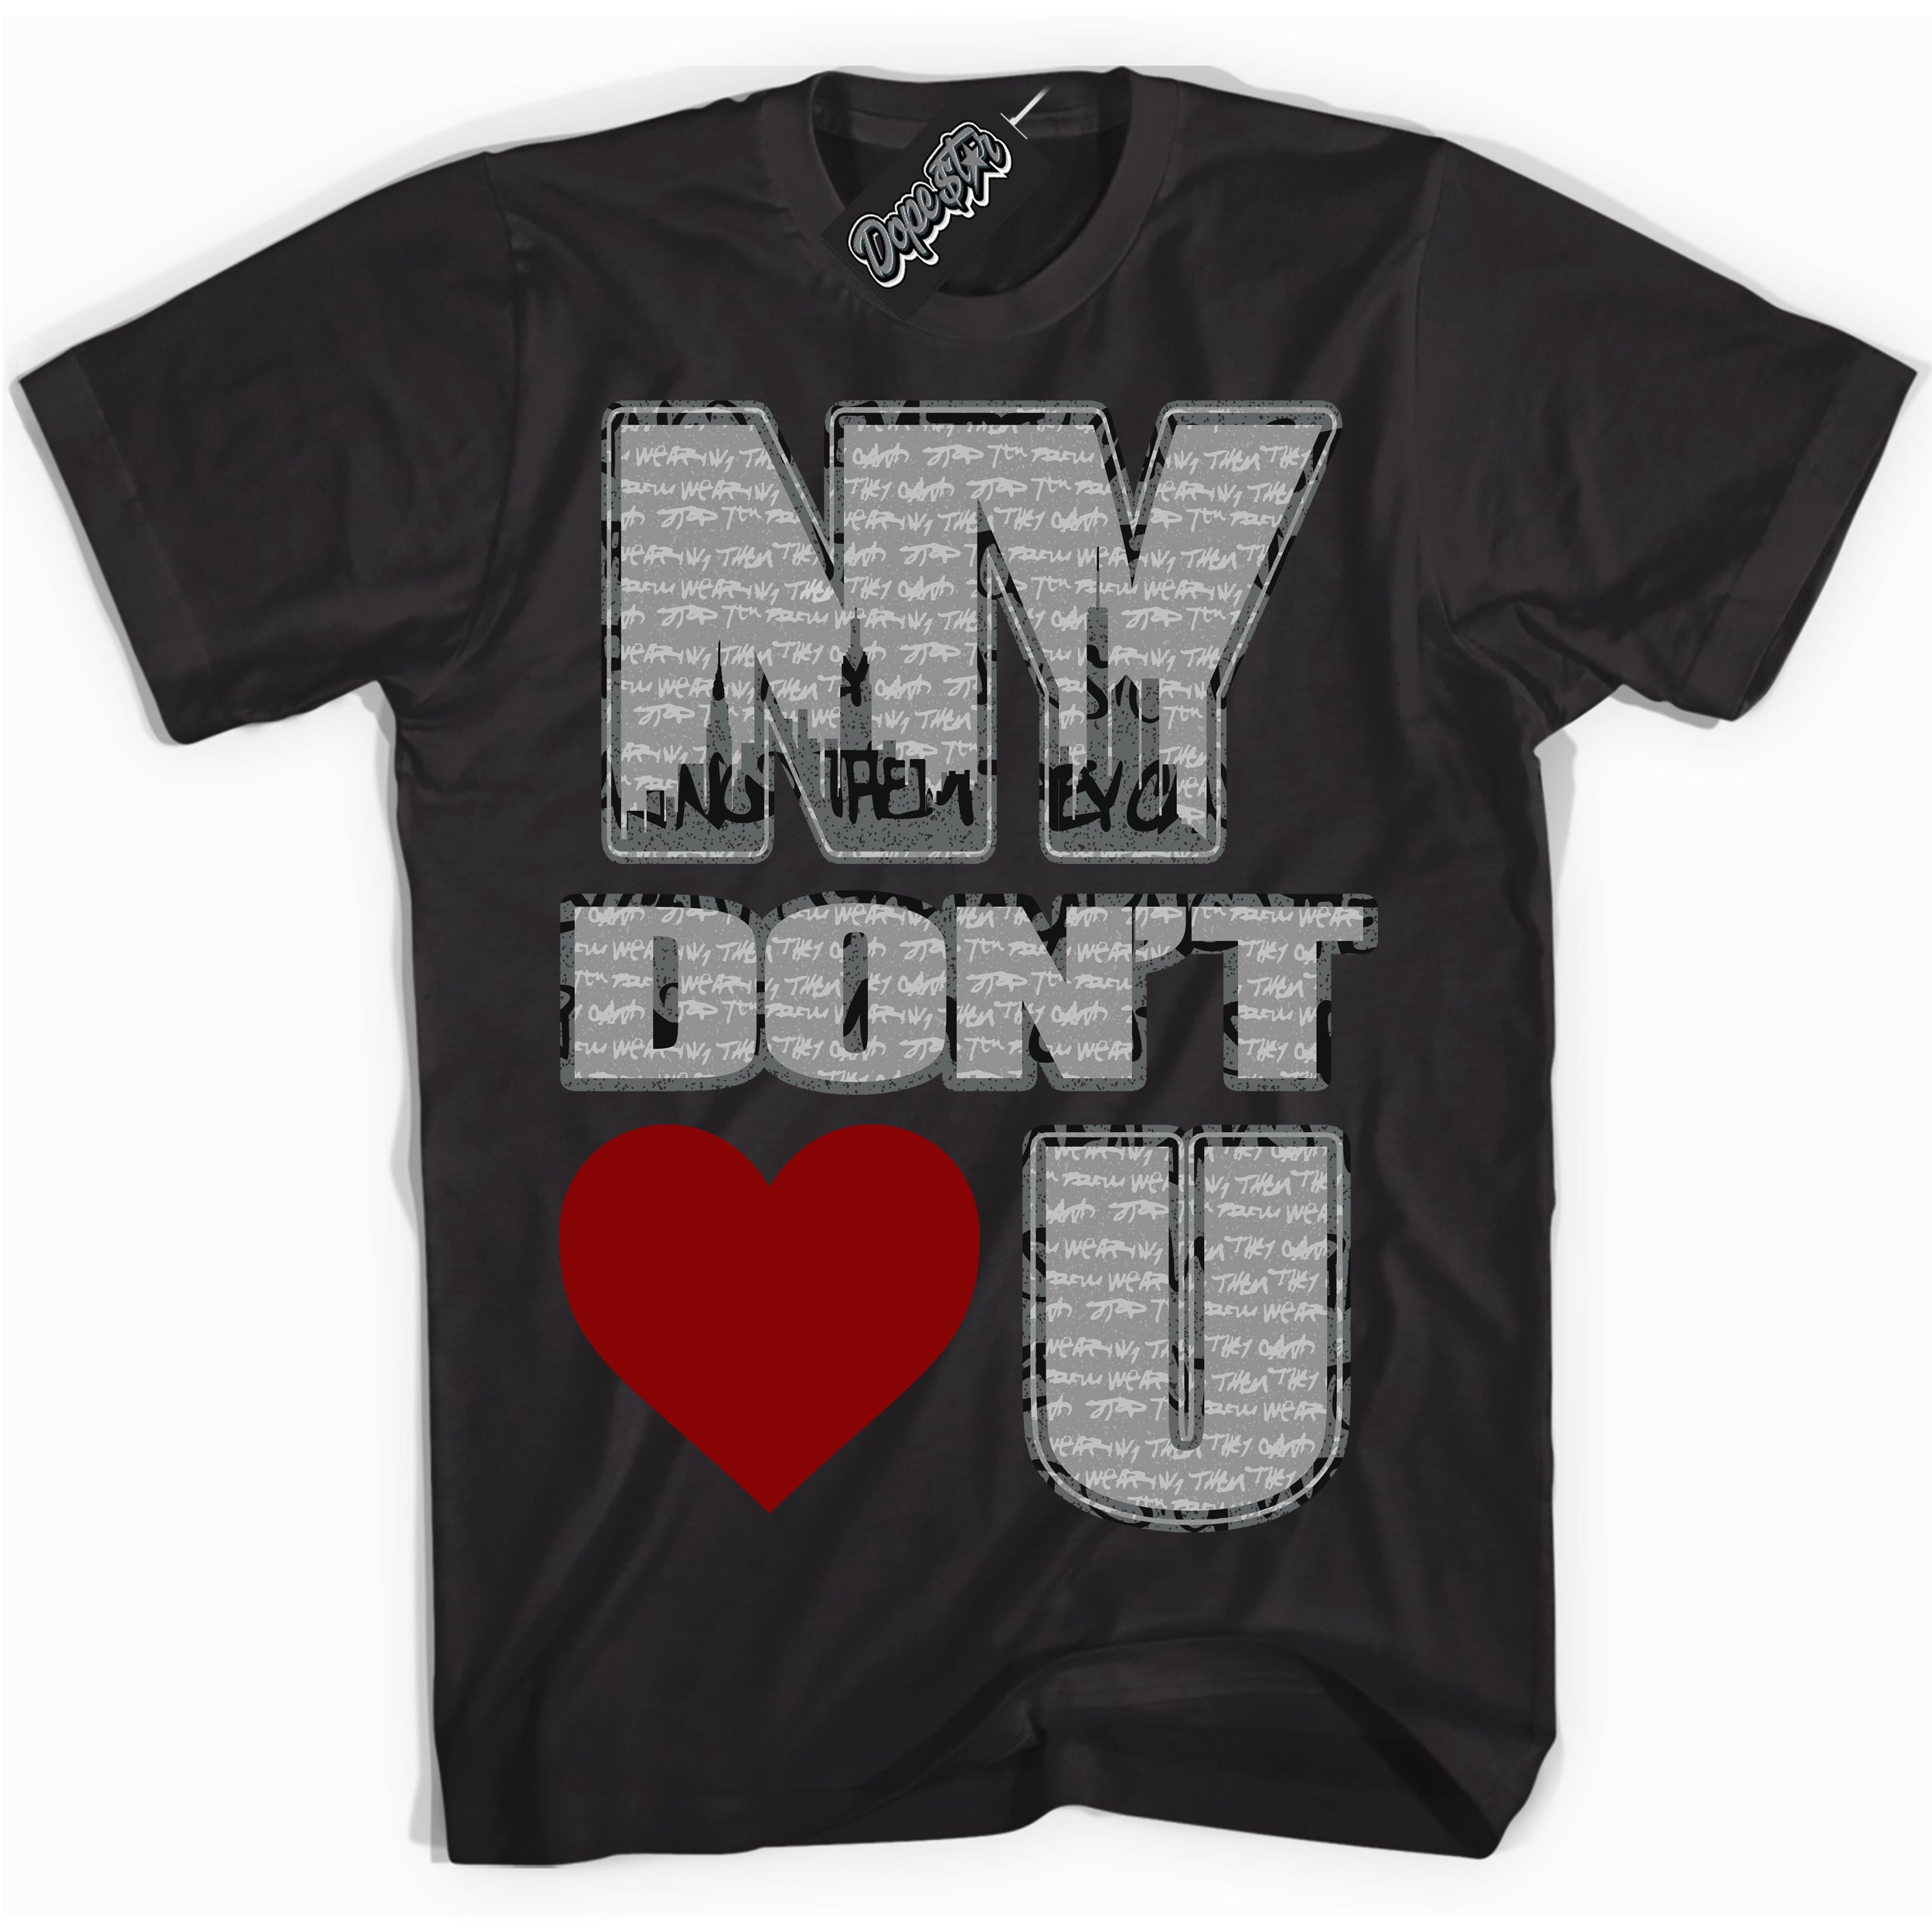 Cool Black Shirt with “ NY Don't Love You ” design that perfectly matches Rebellionaire 1s Sneakers.